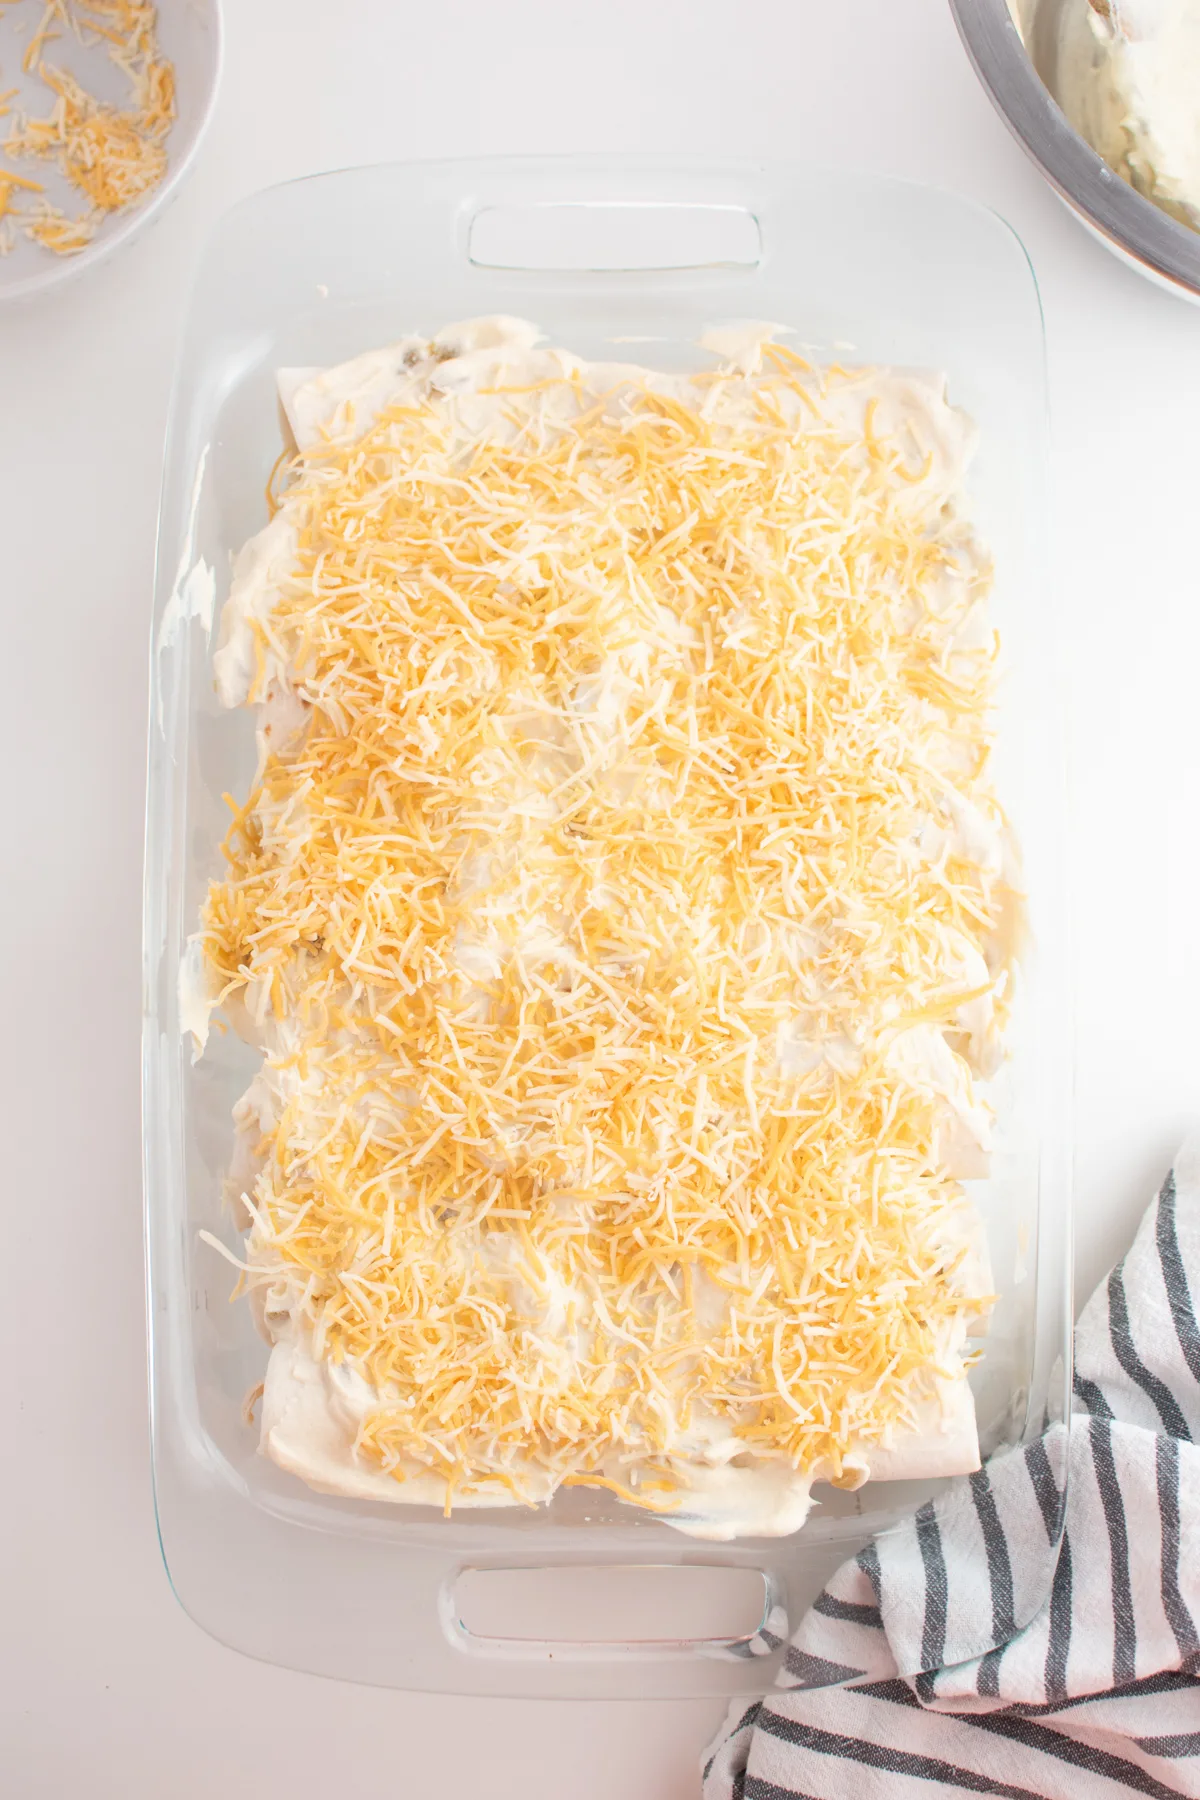 White chicken enchiladas lined up in clear glass dish with shredded cheese.